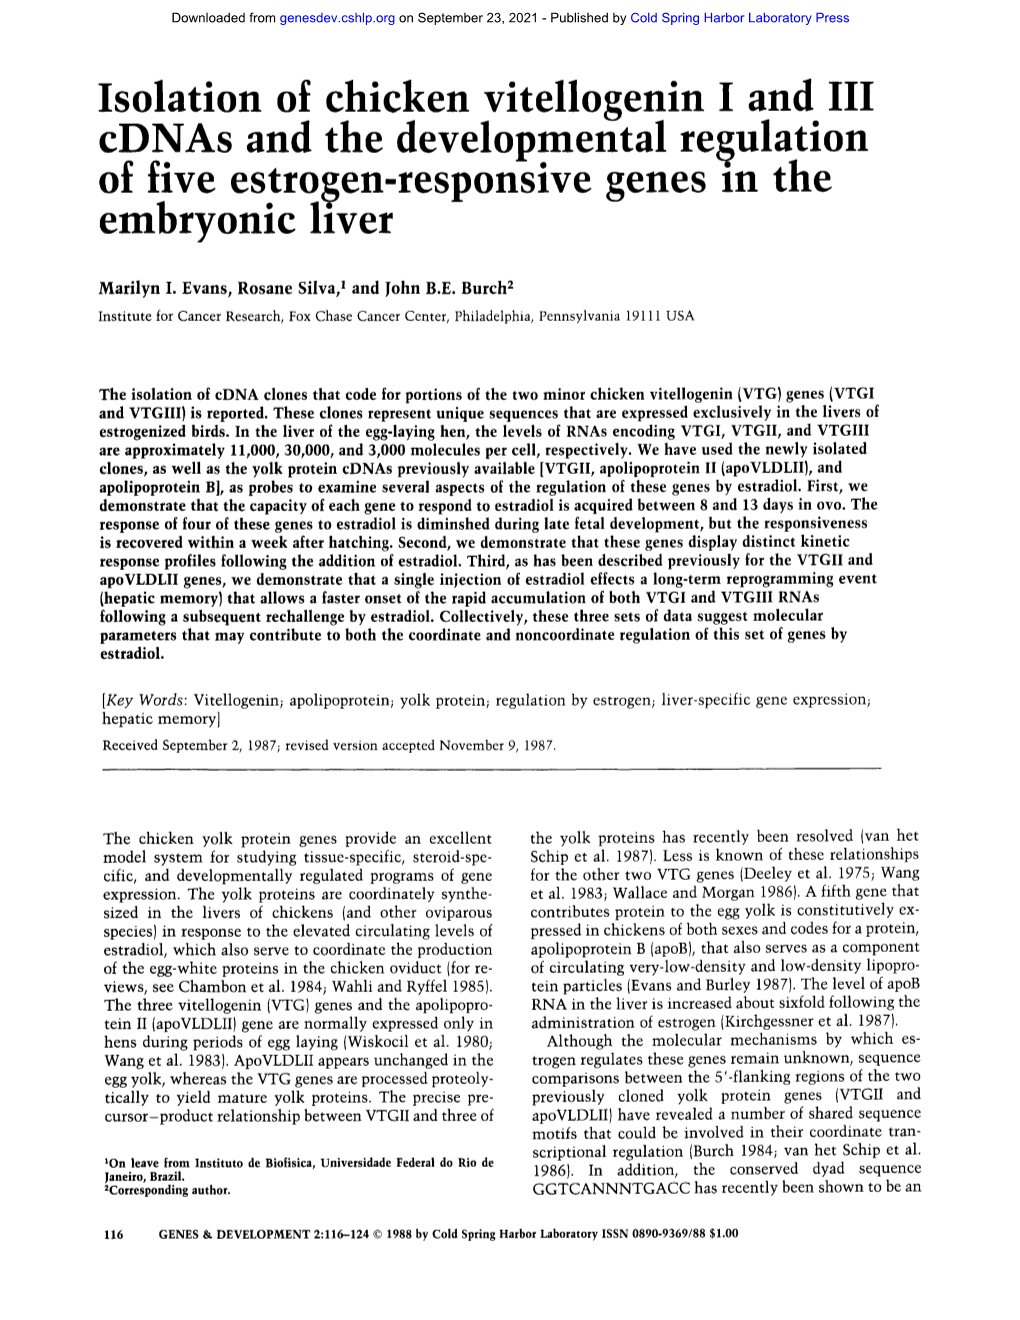 Isolation of Chicken Vitellogenin I and III Cdnas and the Developmental Resulation of Five Estrogen-Responsive Genes M the Embryonic Liver